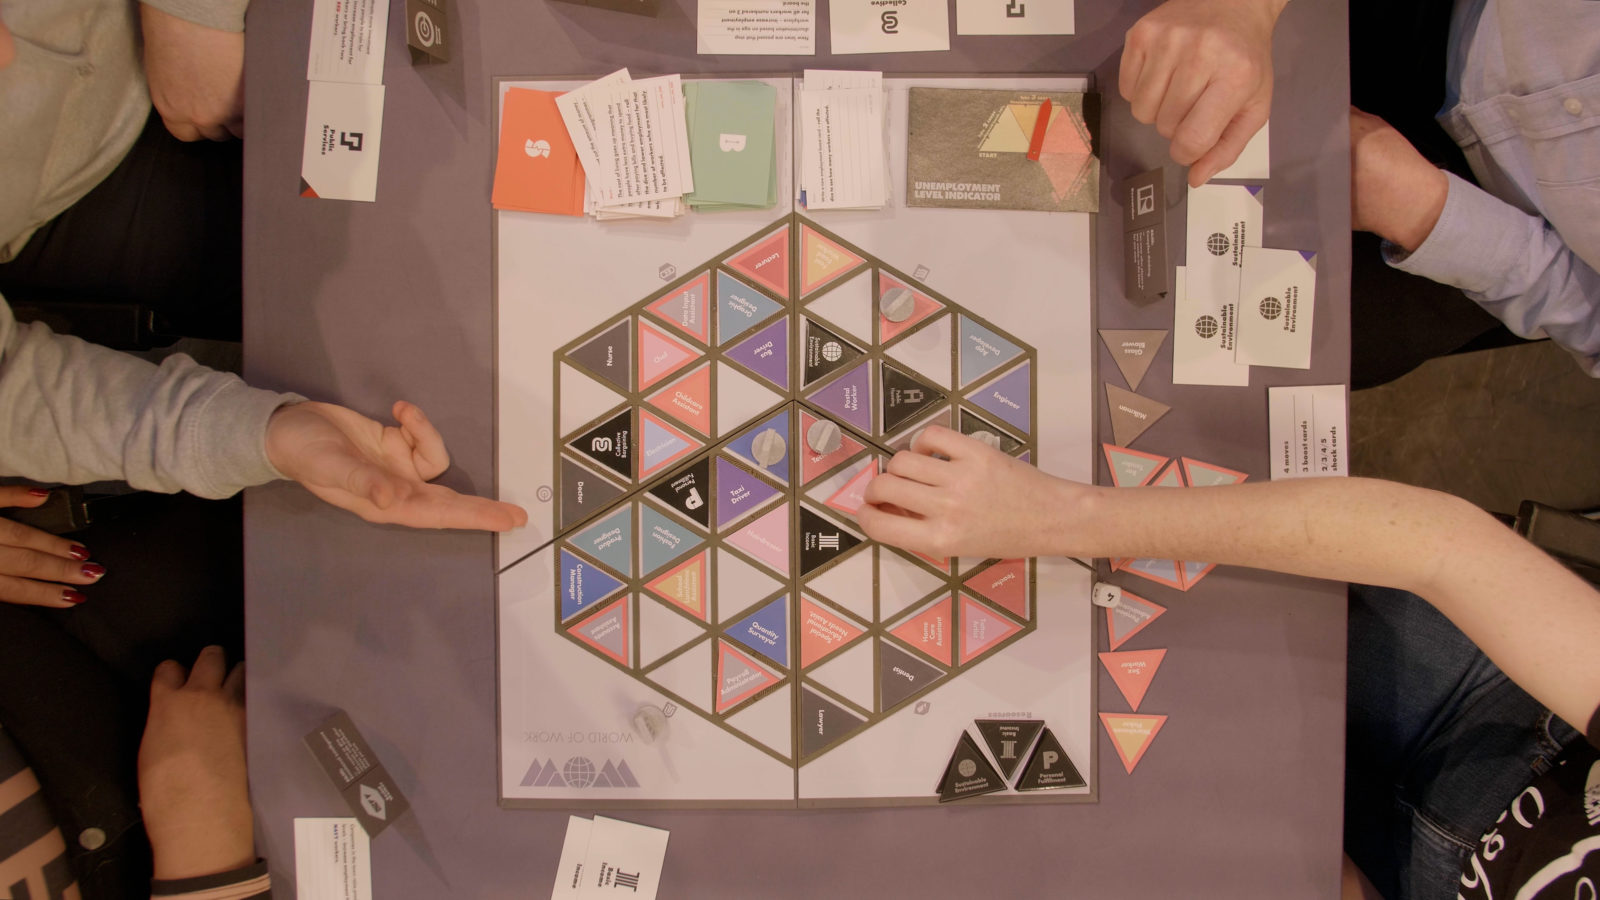 A Birds Eye view shot of the board game being played, one hand picks up a card and another points at the board from the other side of the table. The cards are small triangles in different colours that make up a hexagon in the middle of the board.